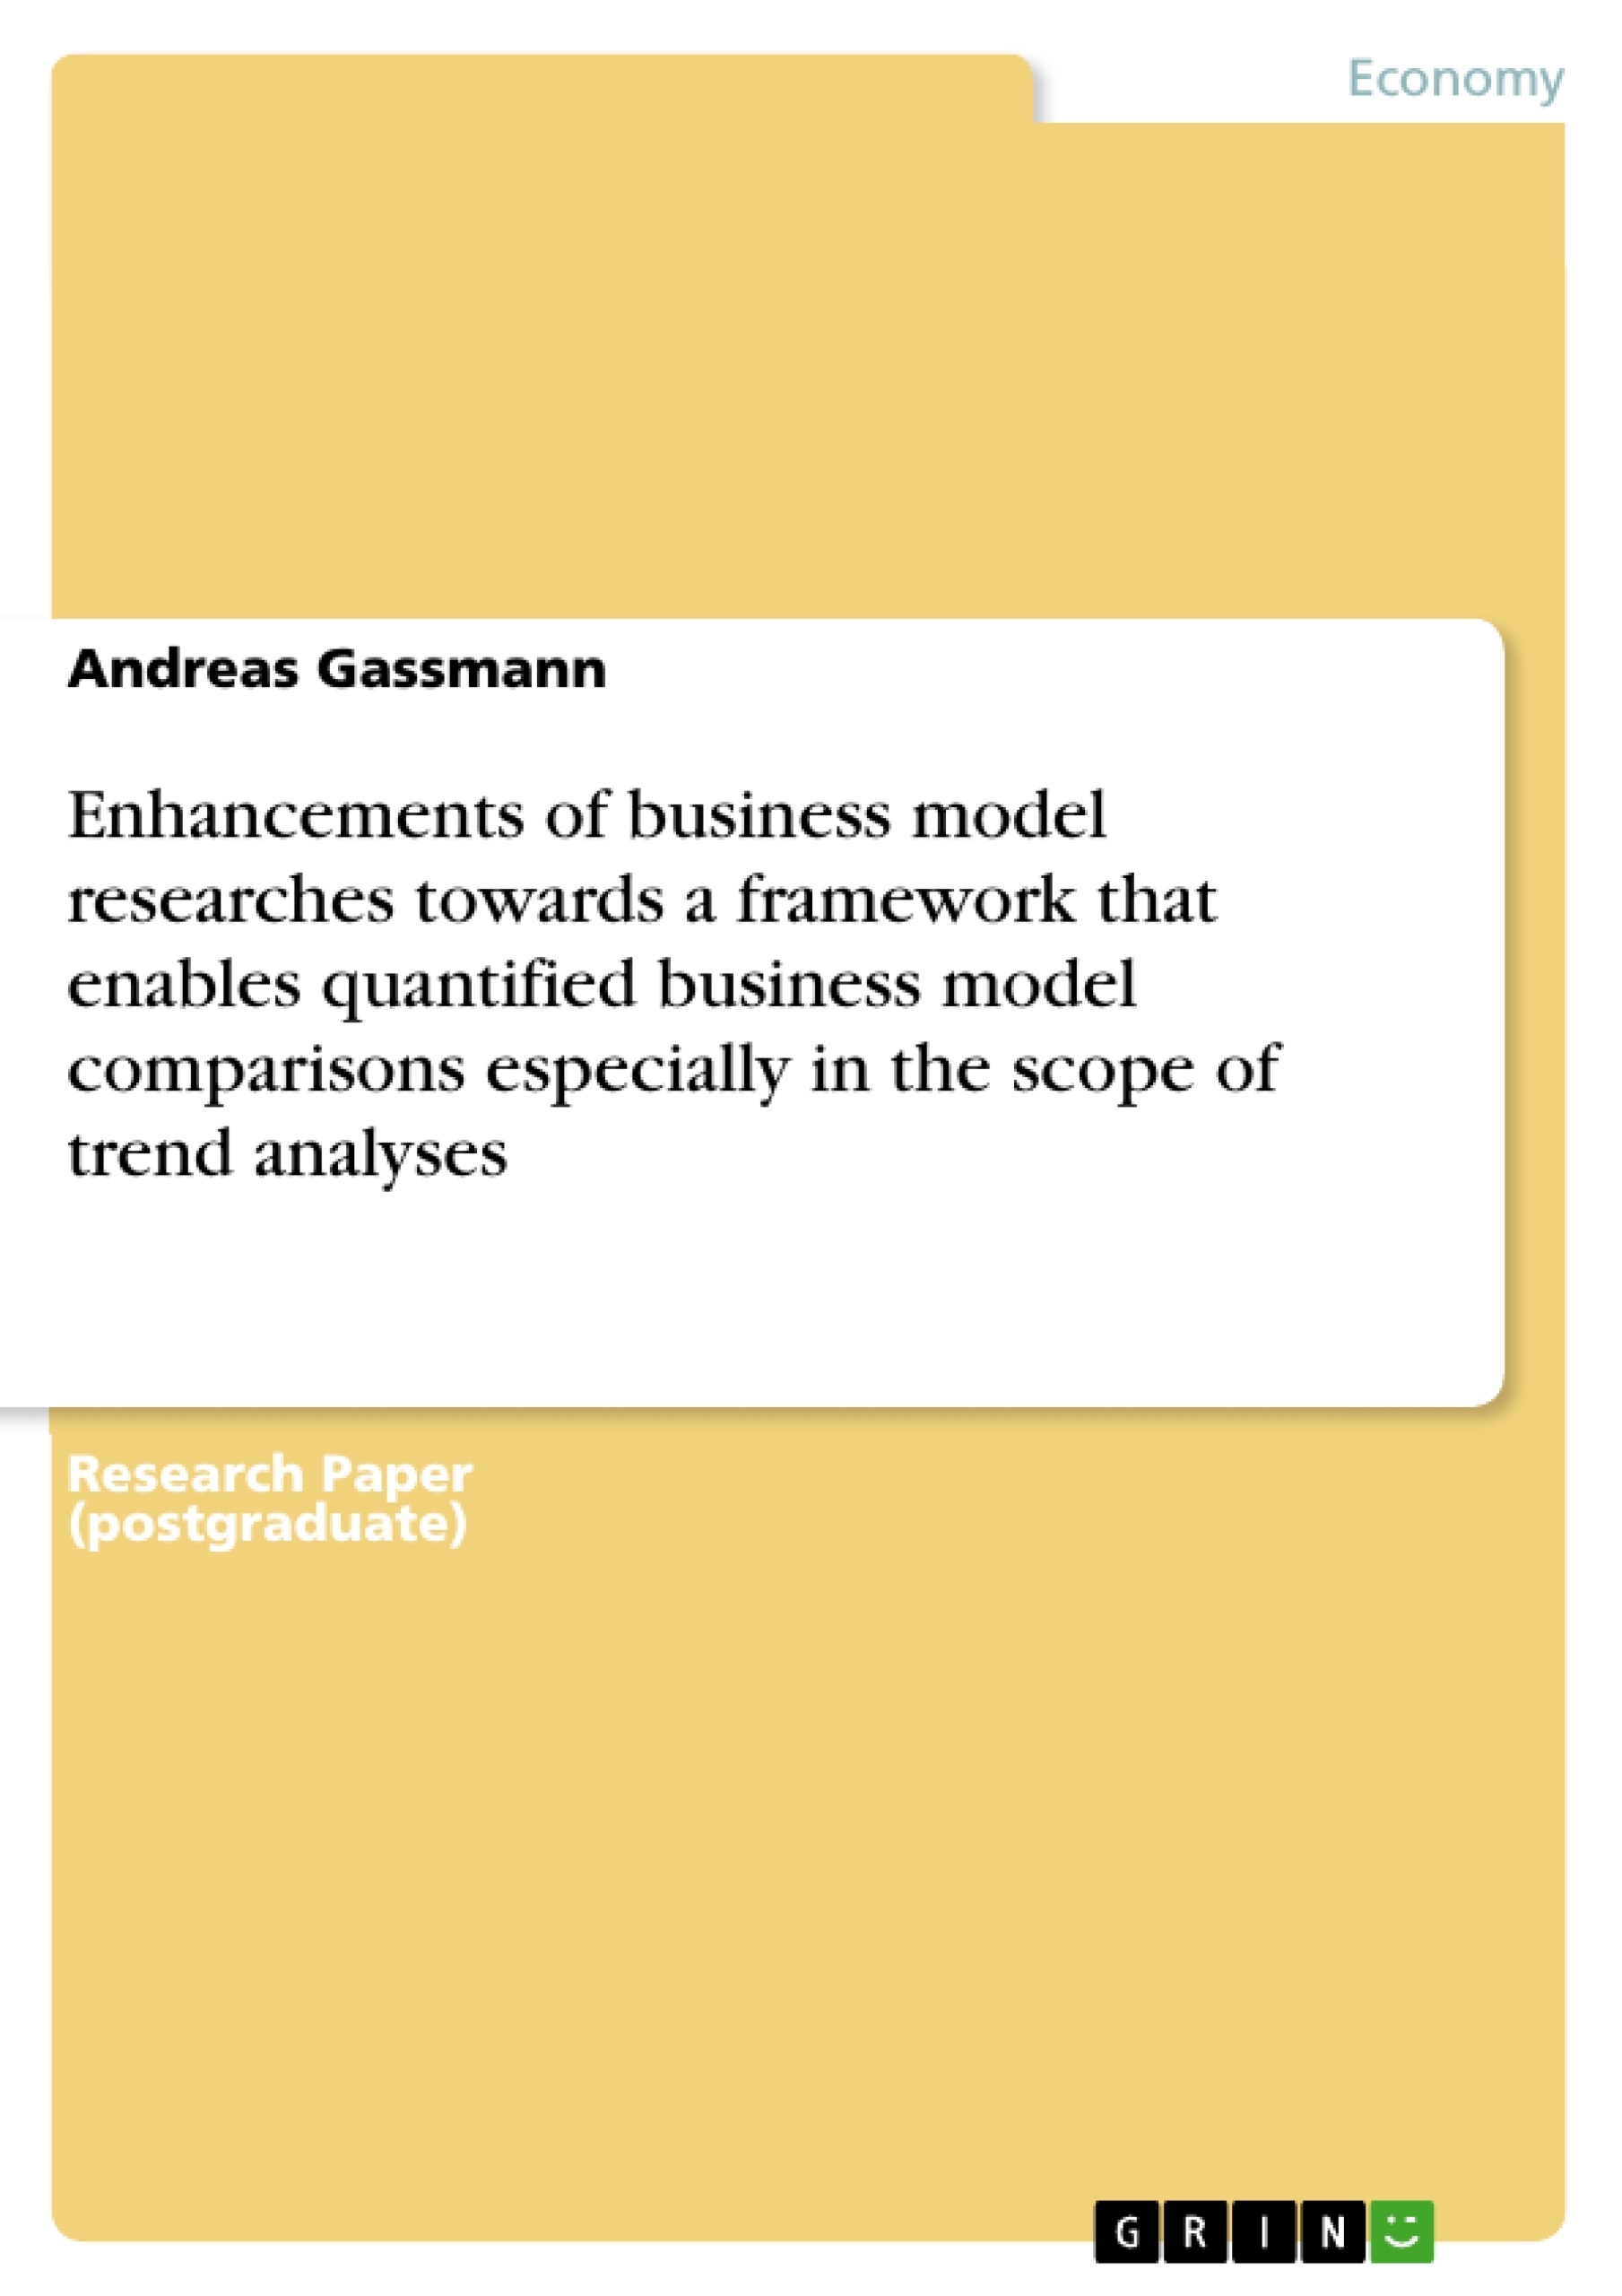 Titre: Enhancements of business model researches towards a framework that enables quantified business model comparisons especially in the scope of trend analyses